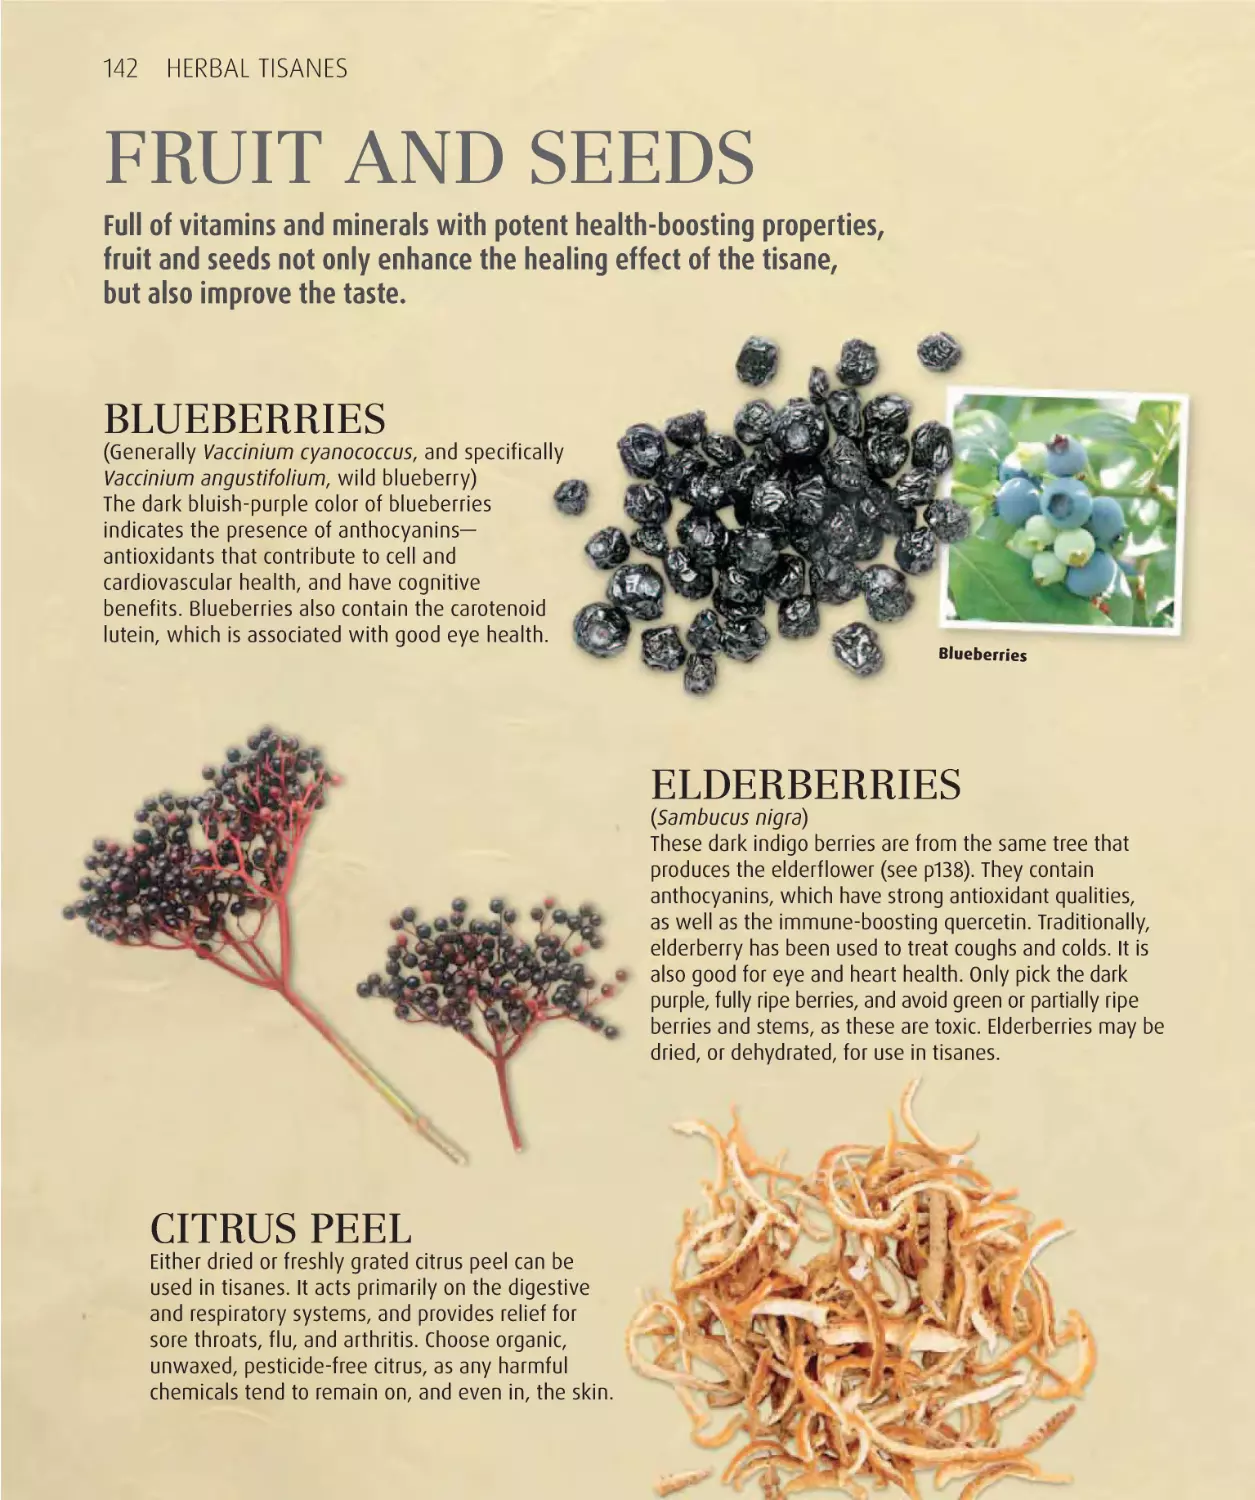 Fruits and seeds 142